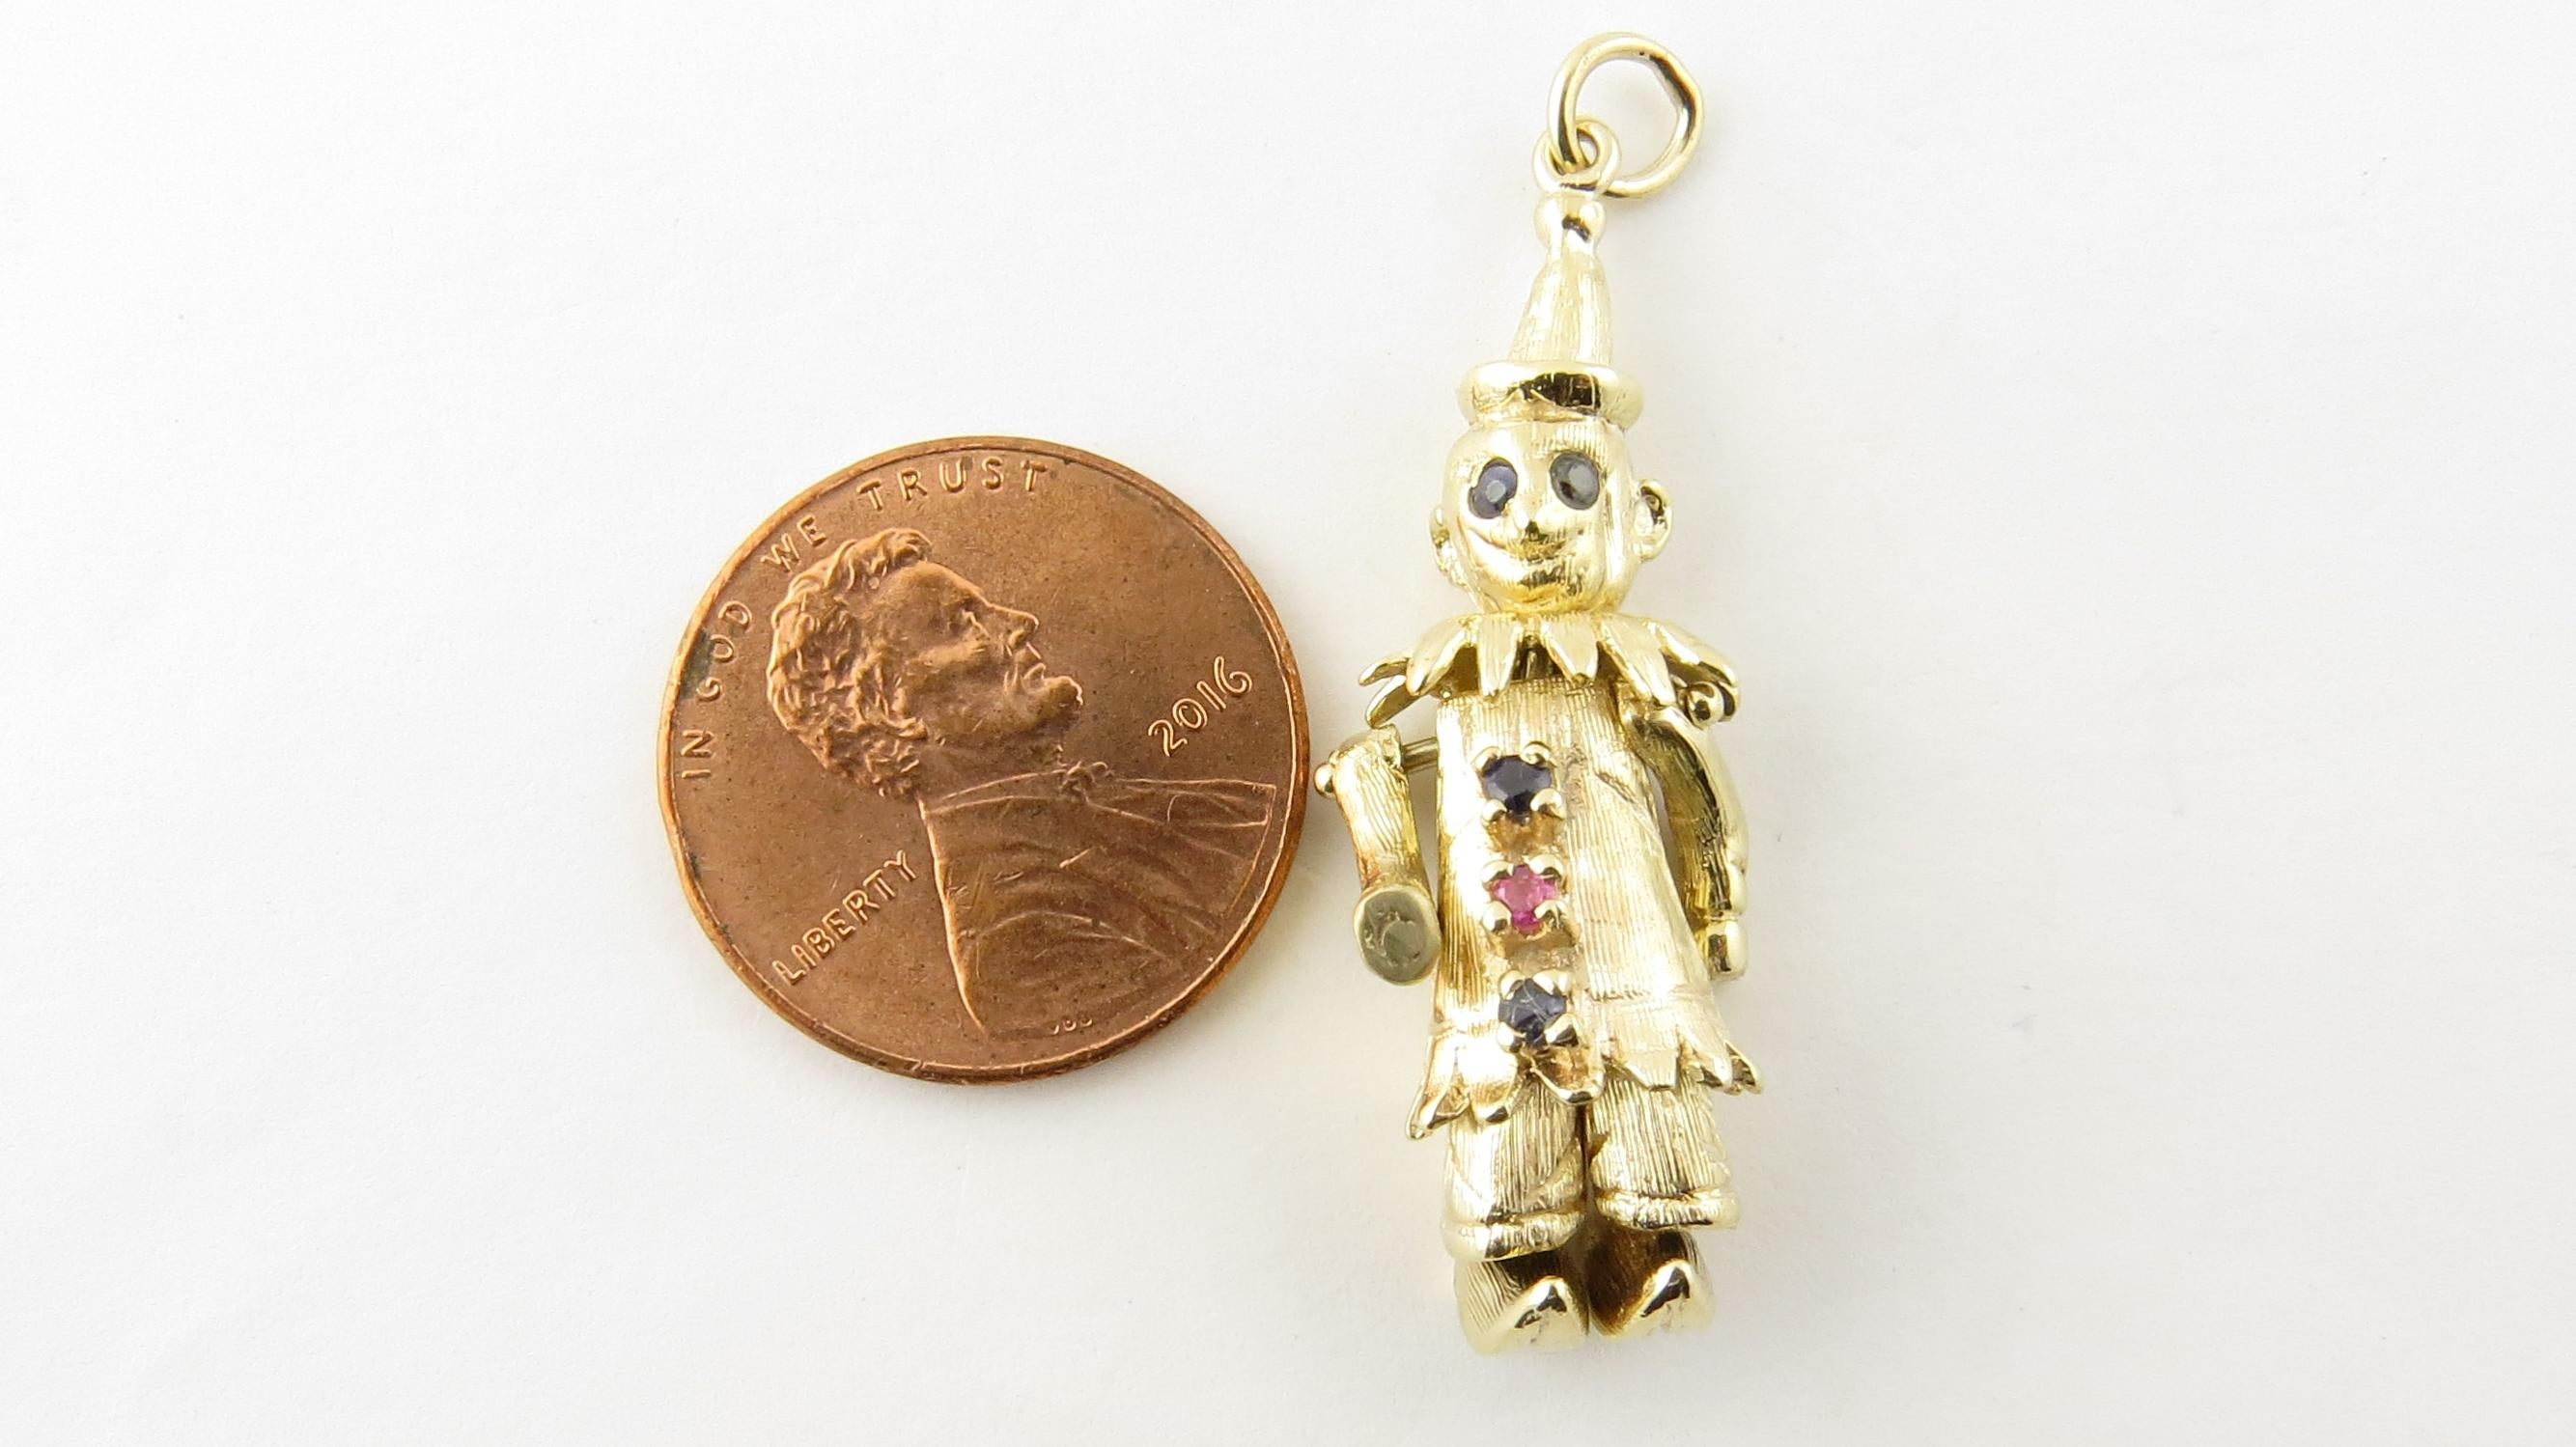 clown gold necklace